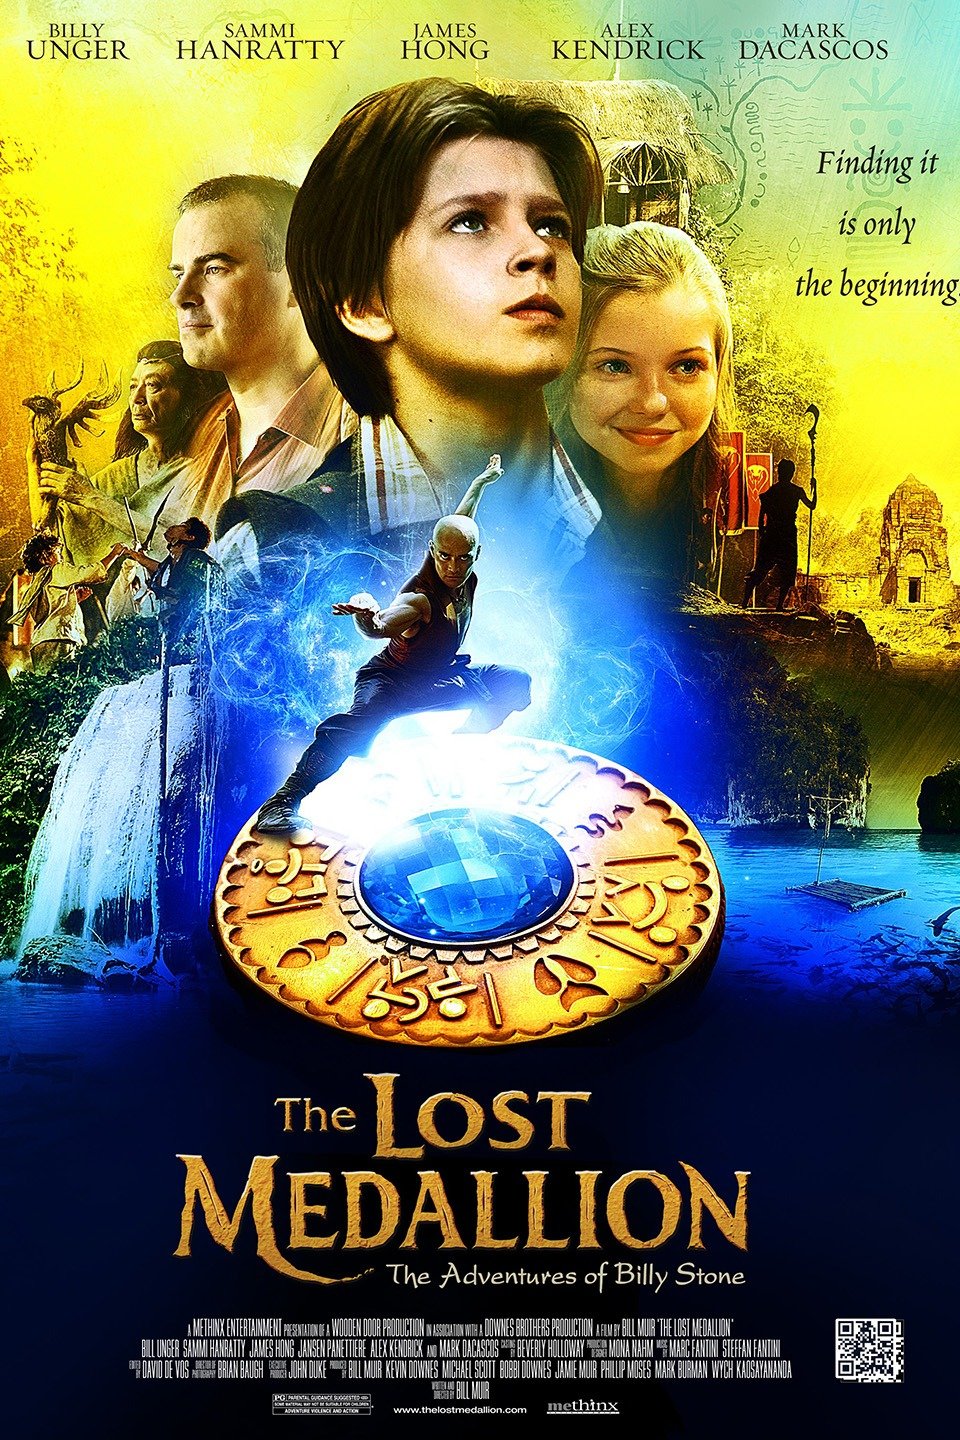 The Lost Medallion: The Adventures of Billy Stone-The Lost Medallion: The Adventures of Billy Stone